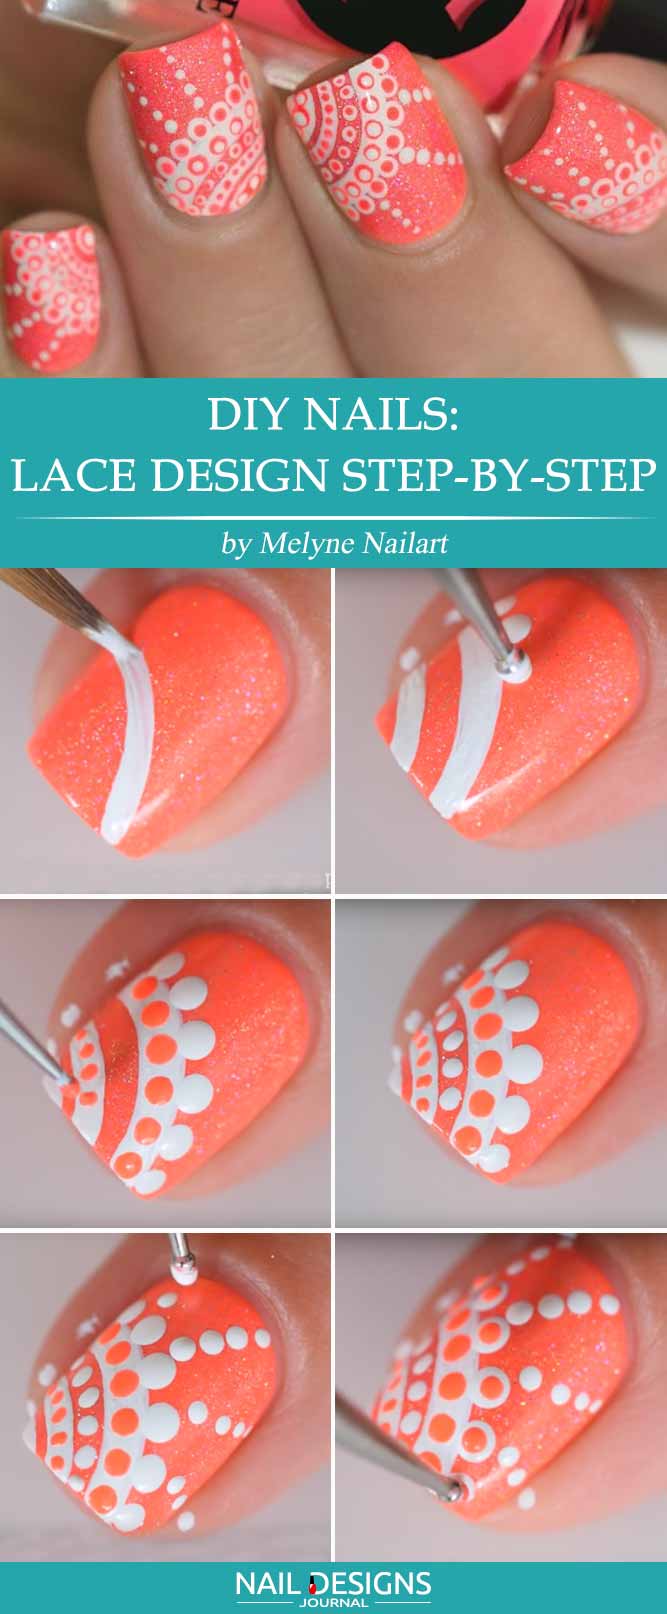 10 Super Easy DIY Nails Designs Every Girl Should Know - Fashion Daily